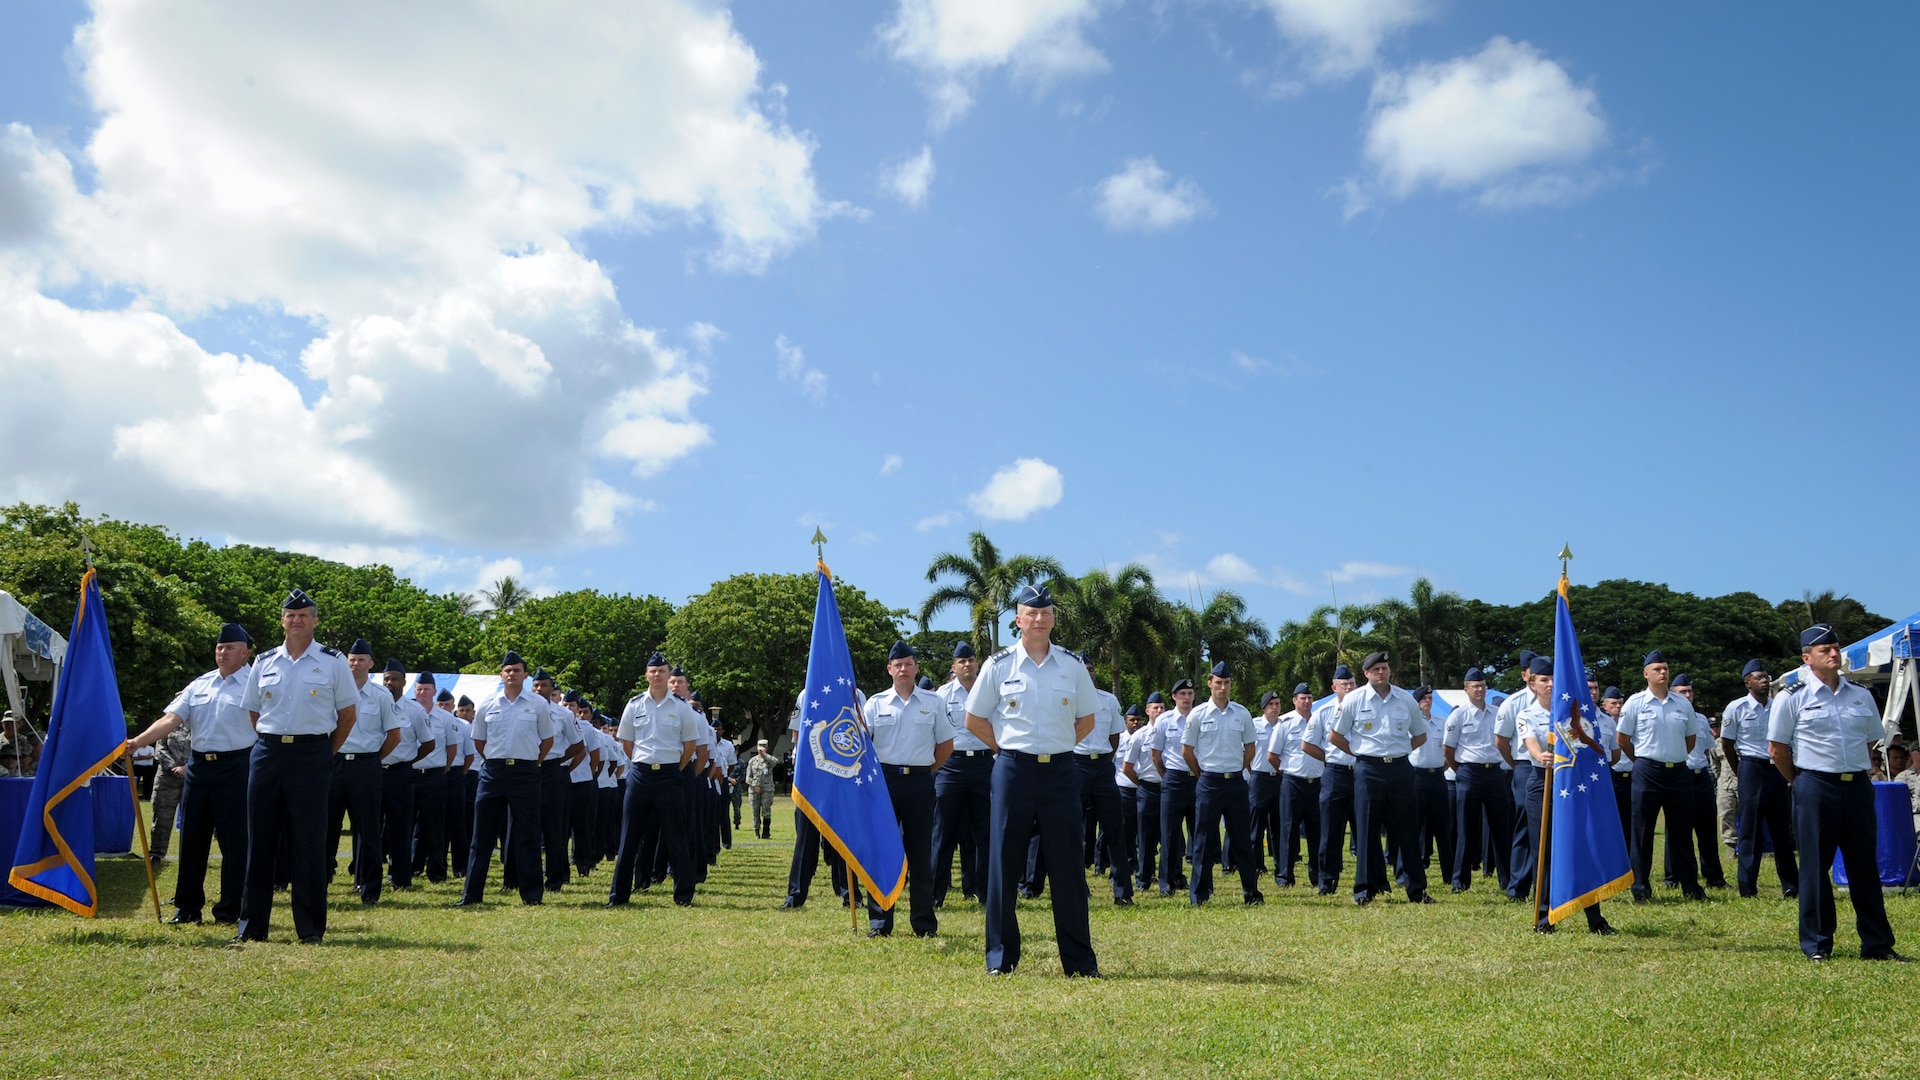 Pacific Air Forces Airmen representing the command's numbered Air Forces listen to remarks by their new commander, Gen. Terrence J. O'Shaughnessy, during an assumption-of-command ceremony at Joint Base Pearl Harbor-Hickam, Hawaii, July 12, 2016. O'Shaughnessy now leads U.S. Pacific Command's Air Component, delivering airpower across 52 percent of the globe. (U.S. Air Force photo by Staff Sgt. Kamaile Chan)
